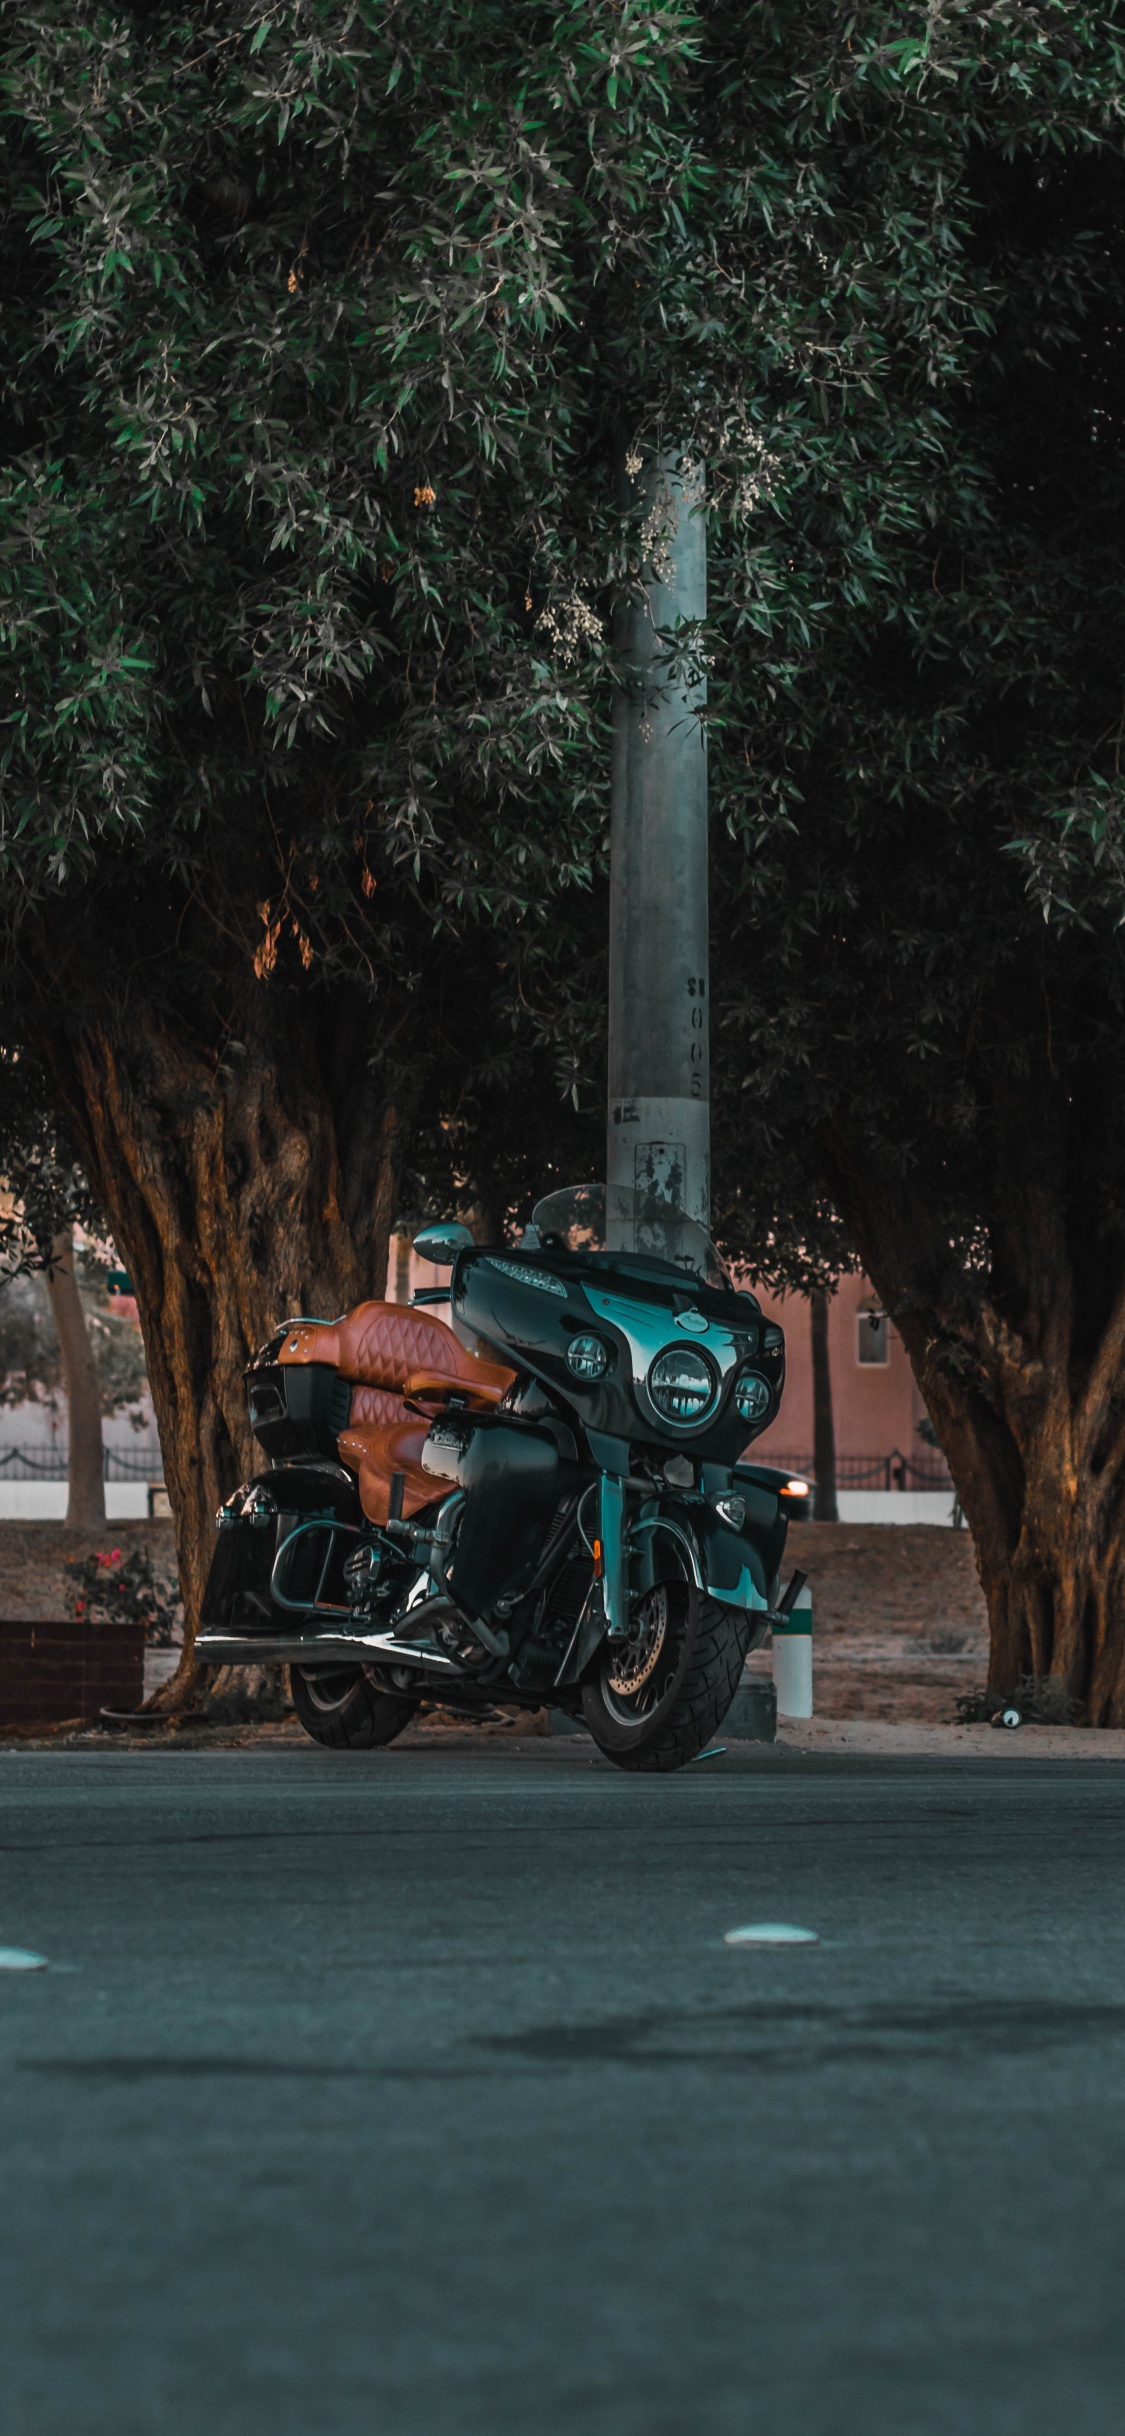 Green and Black Motorcycle Parked on Gray Concrete Road During Daytime. Wallpaper in 1125x2436 Resolution